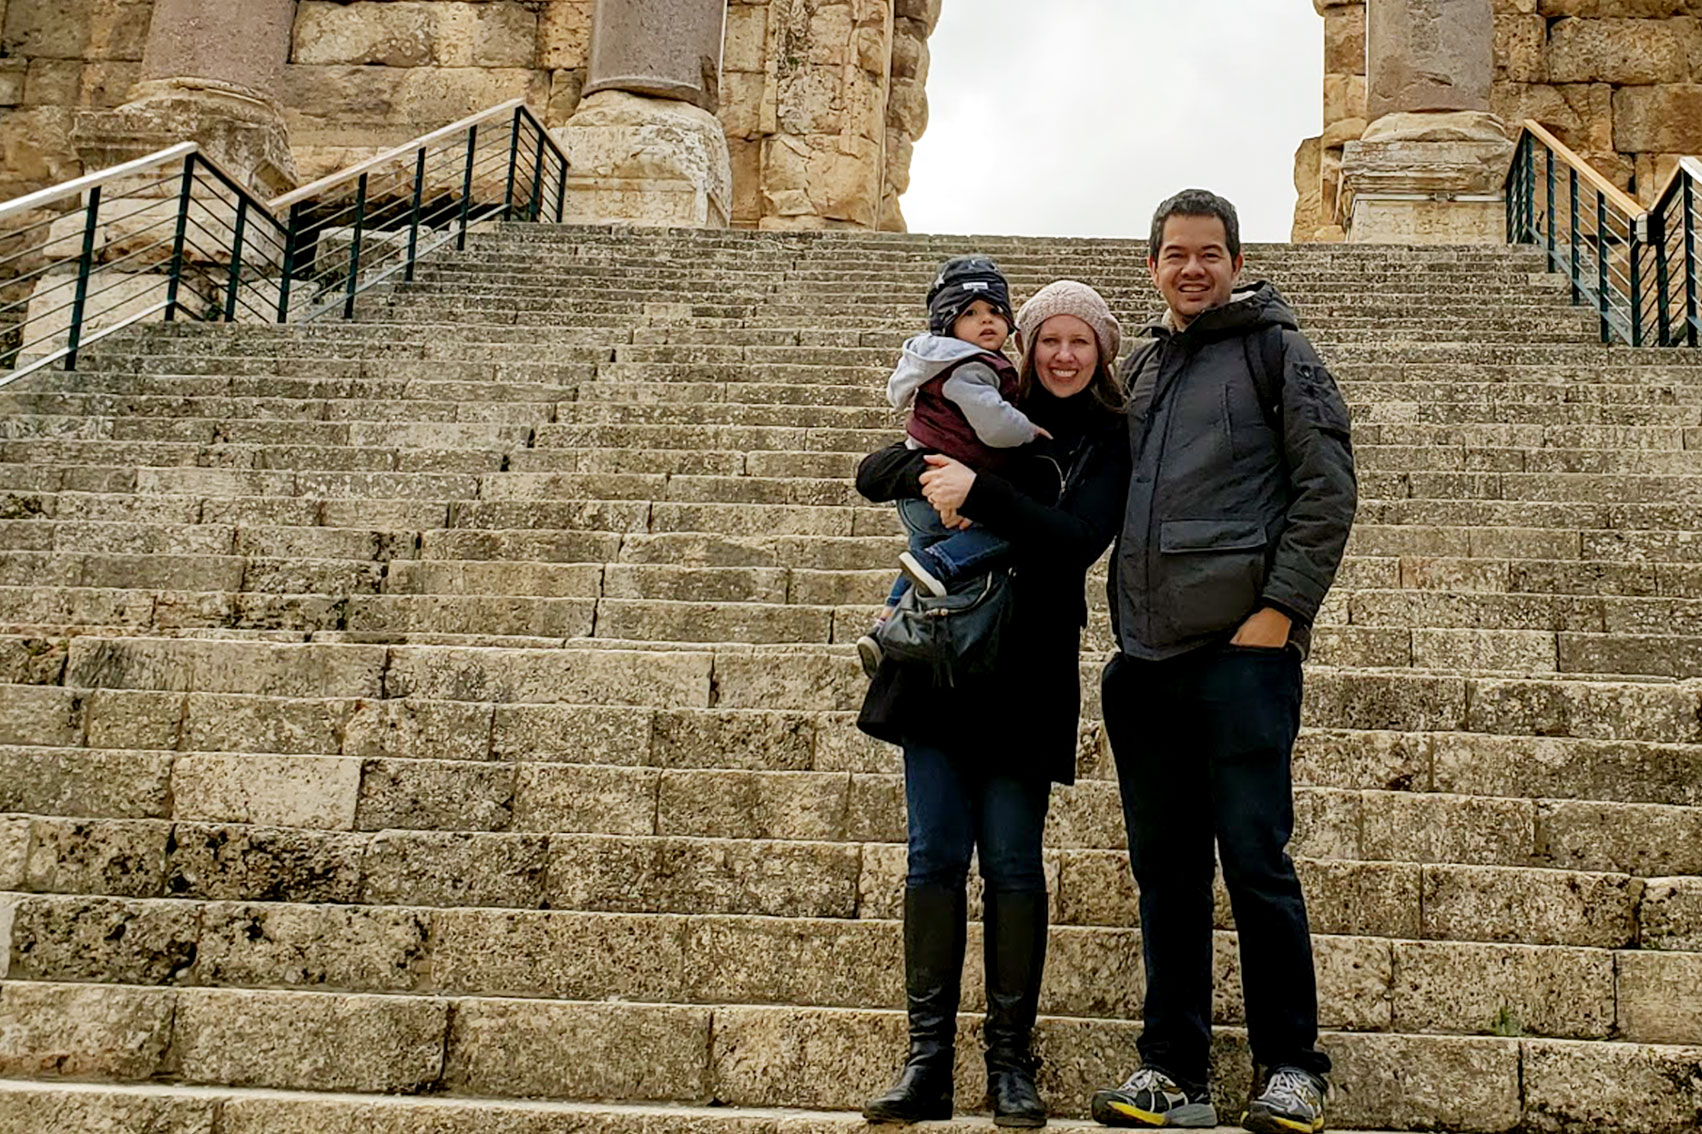 Family portrait at the steps of a historic site.